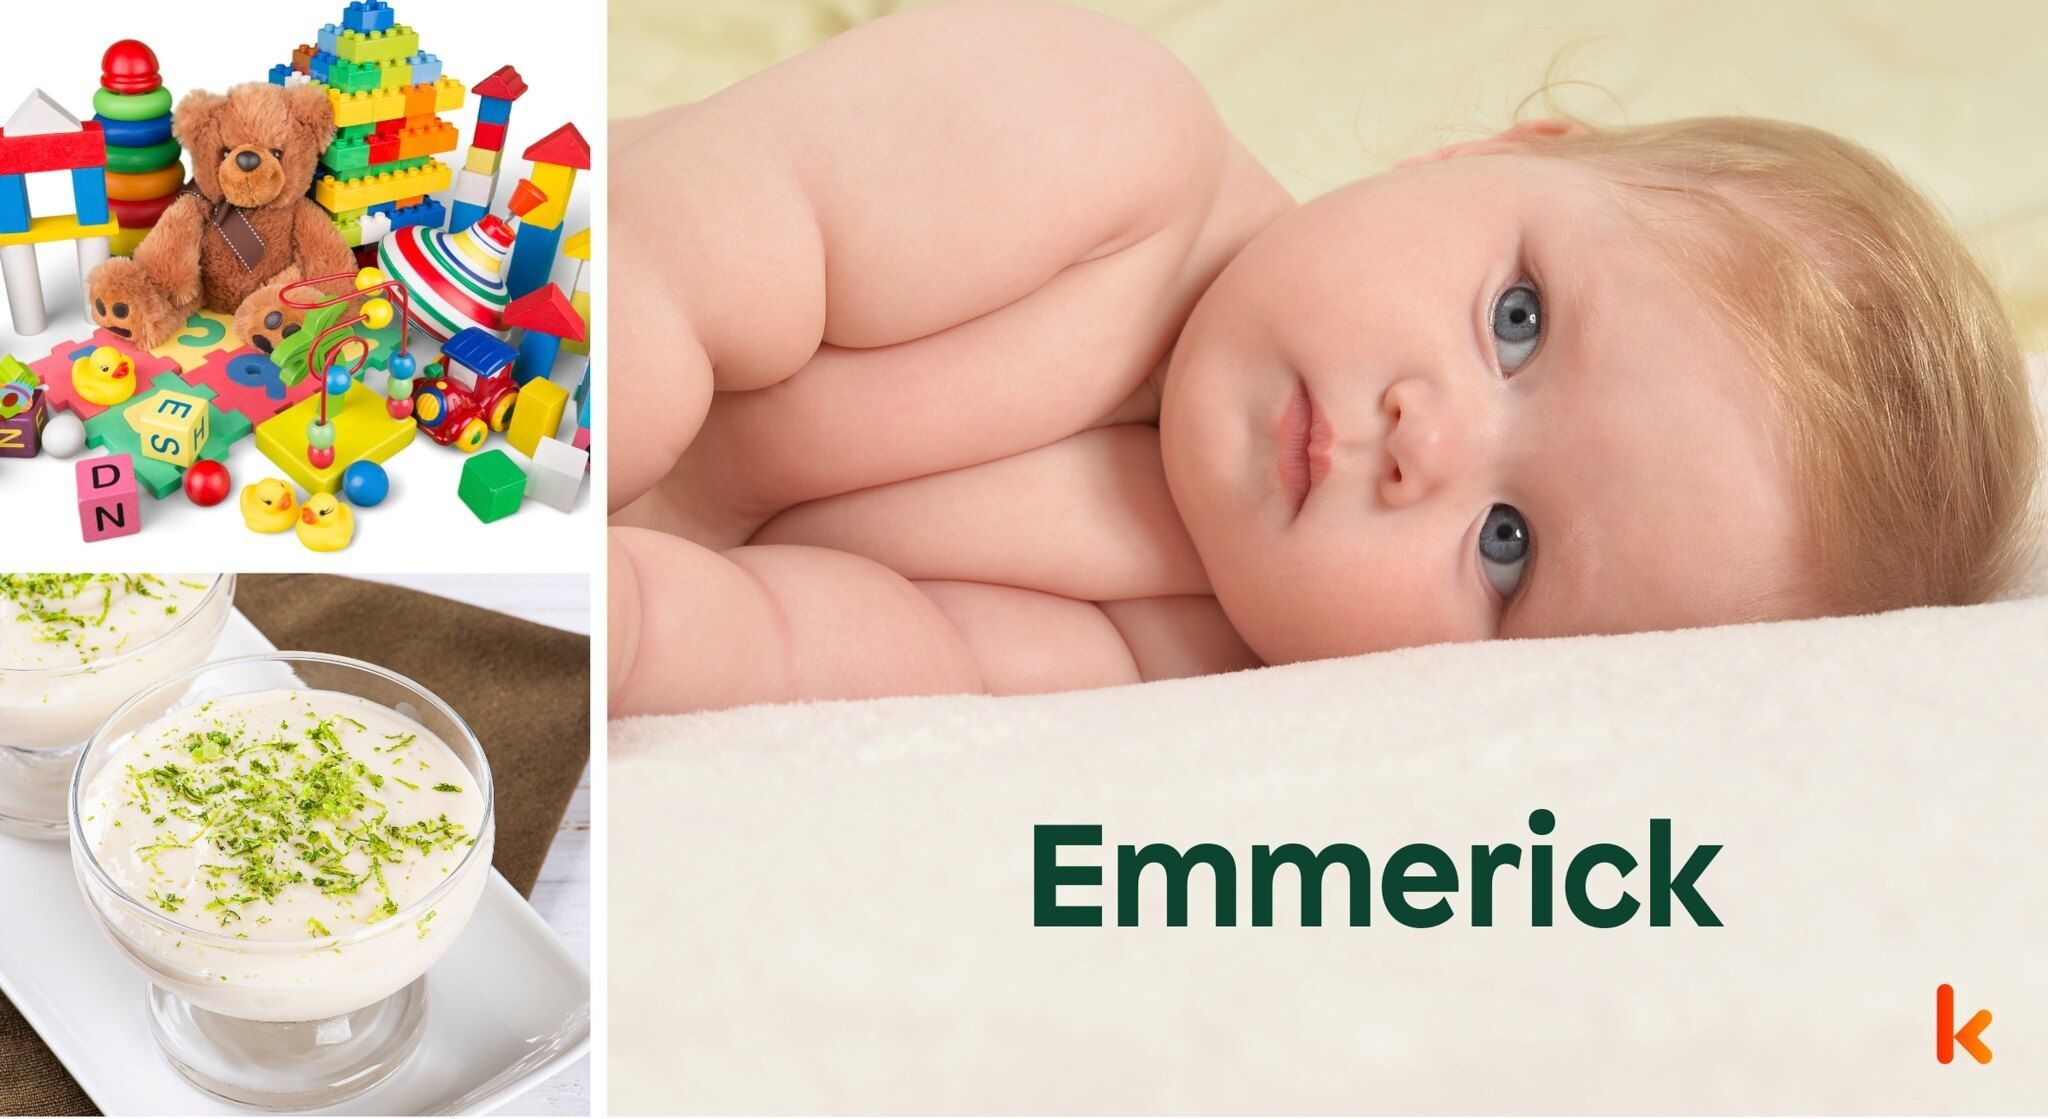 Meaning of the name Emmerick